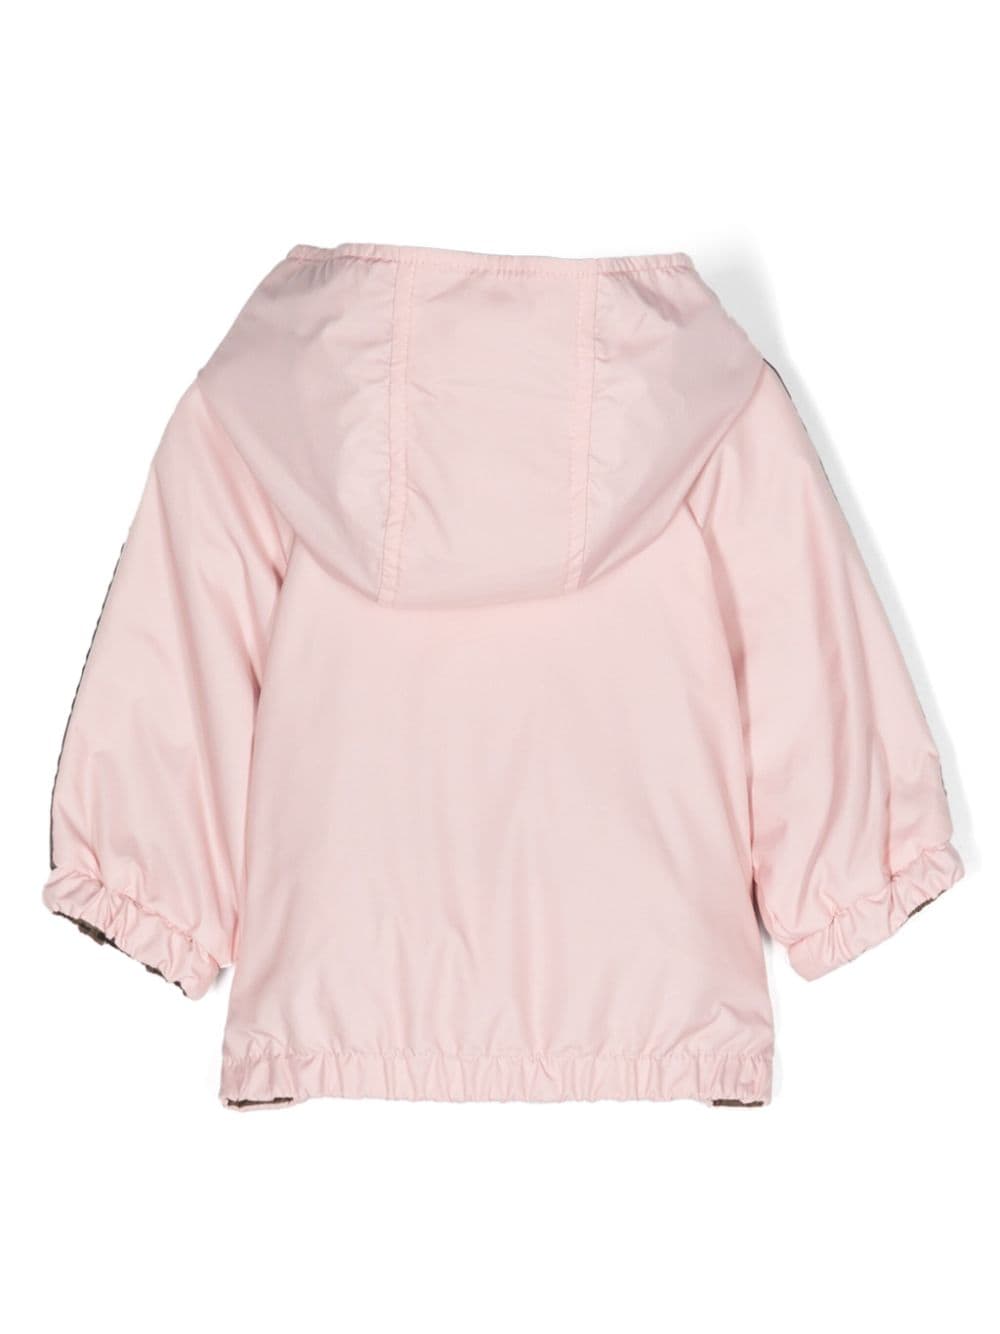 Pink jacket for baby girls with logo